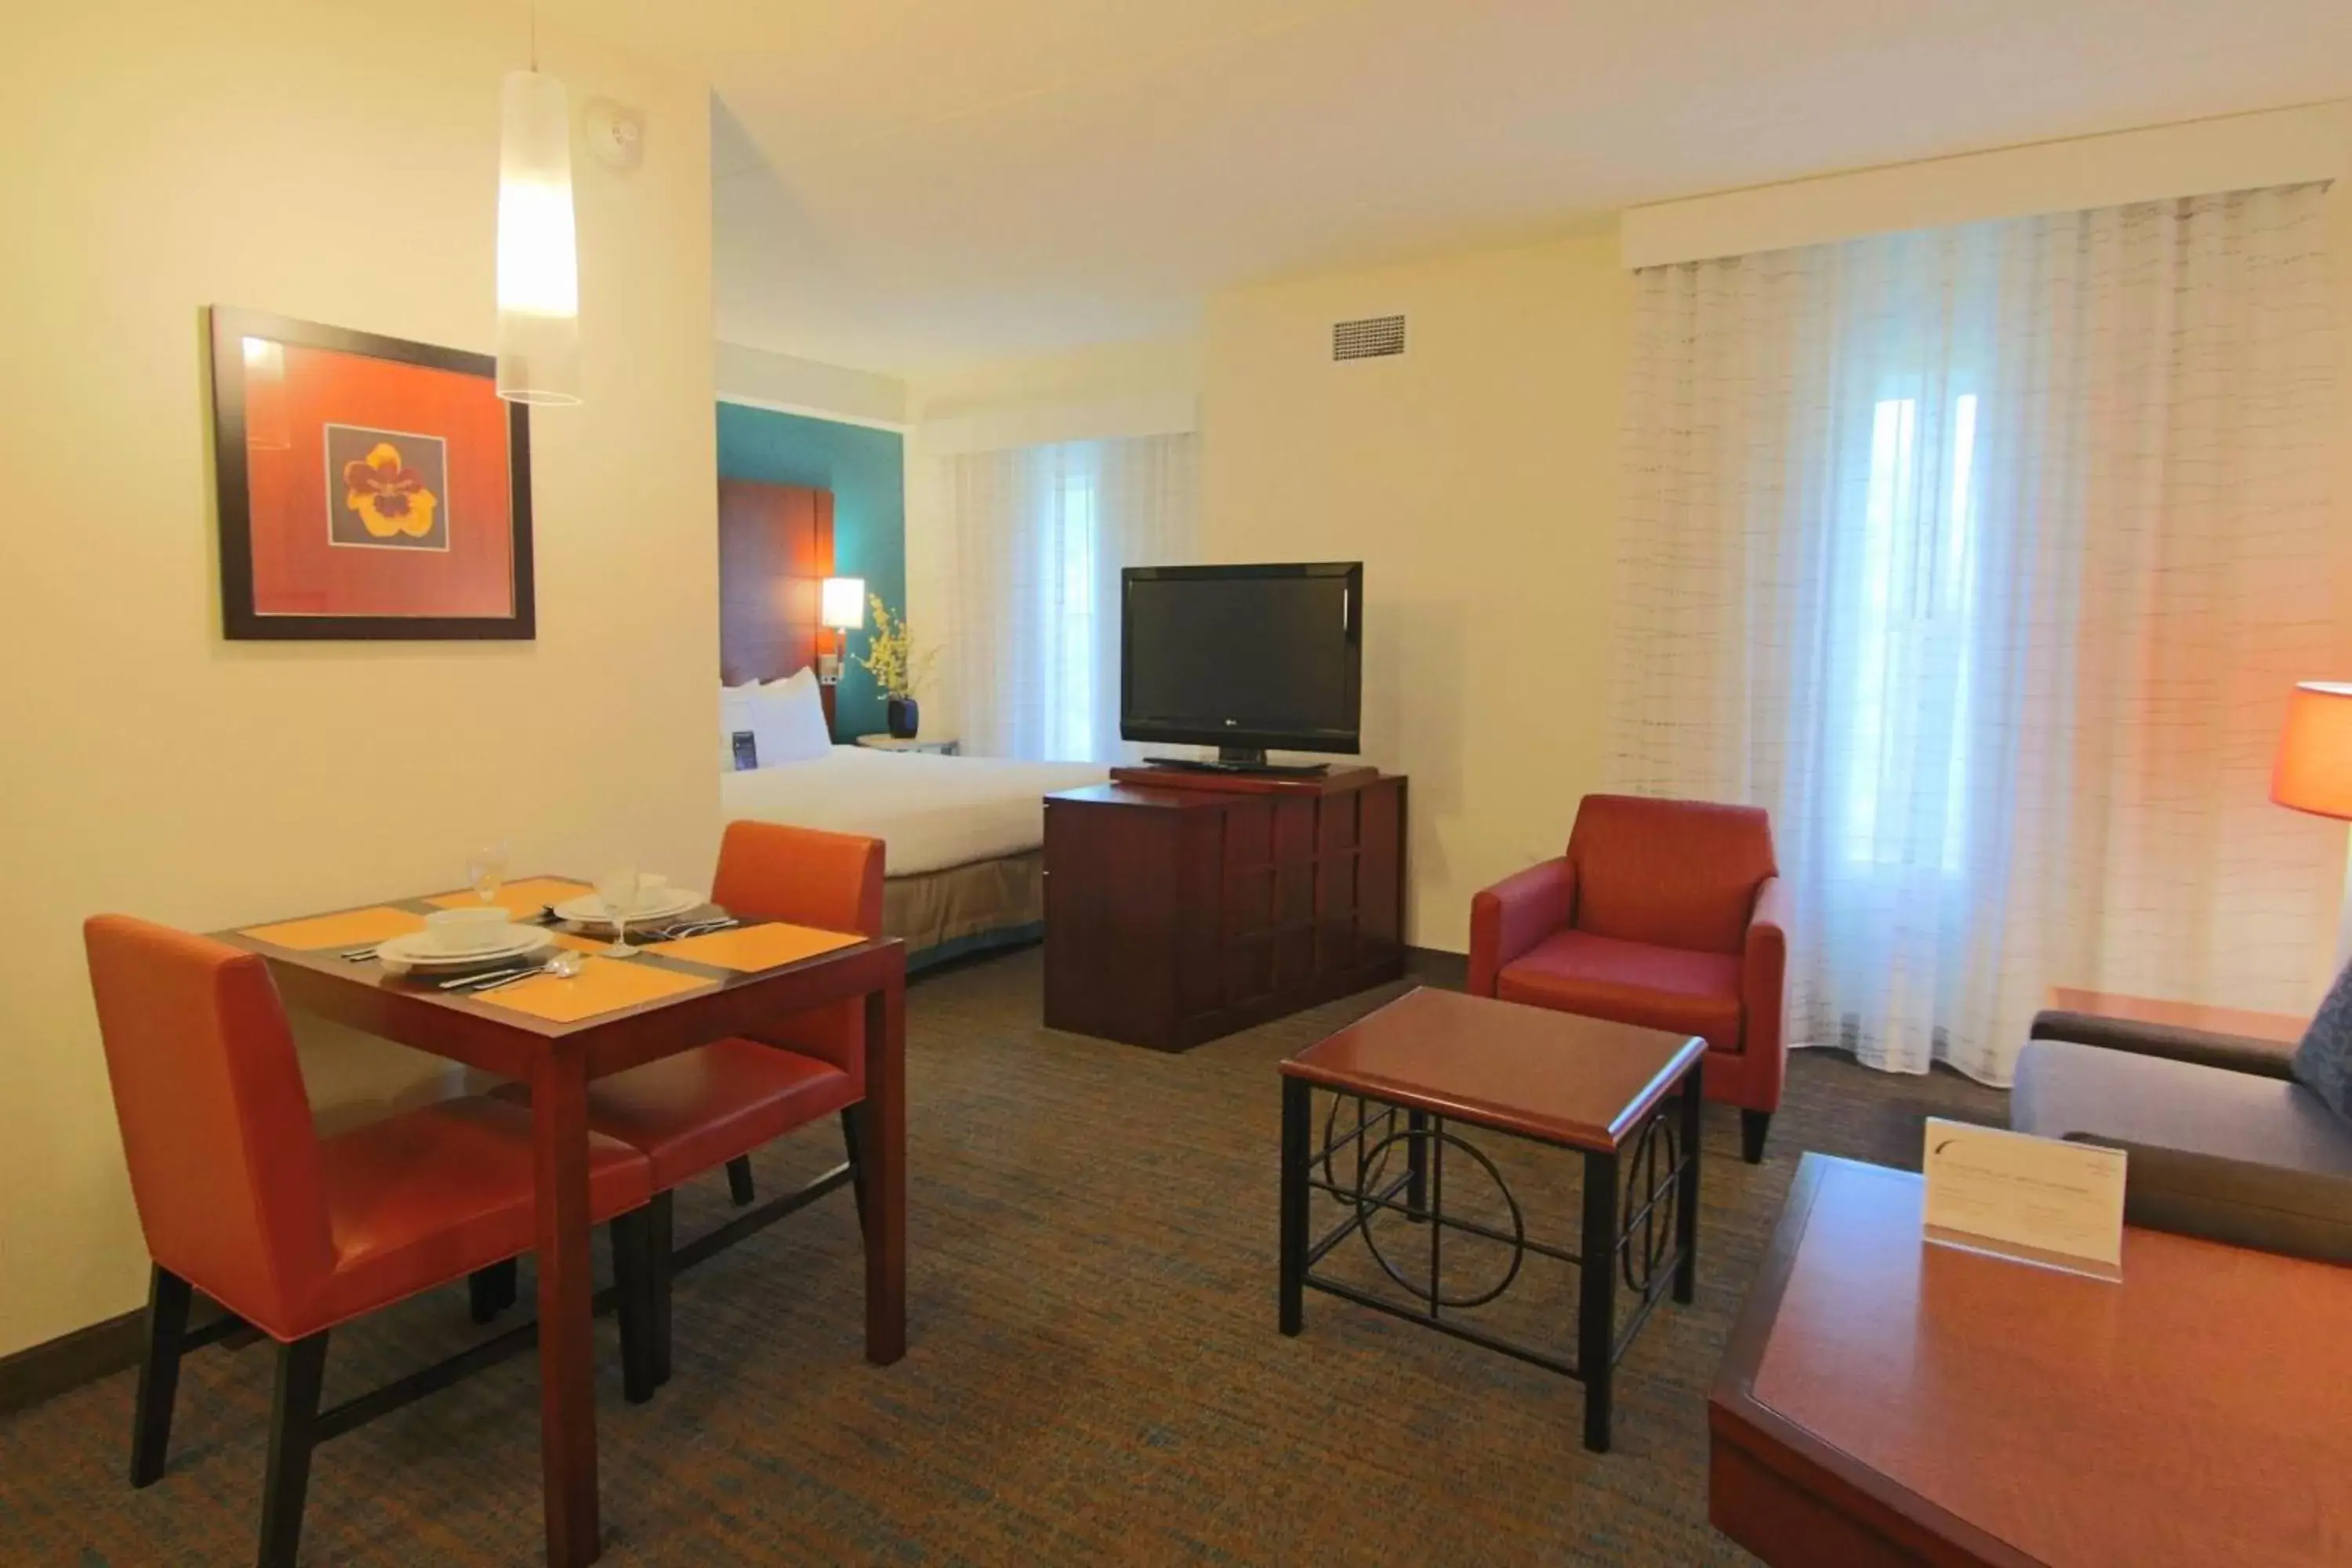 King Studio with Sofa Bed in Residence Inn Newport News Airport